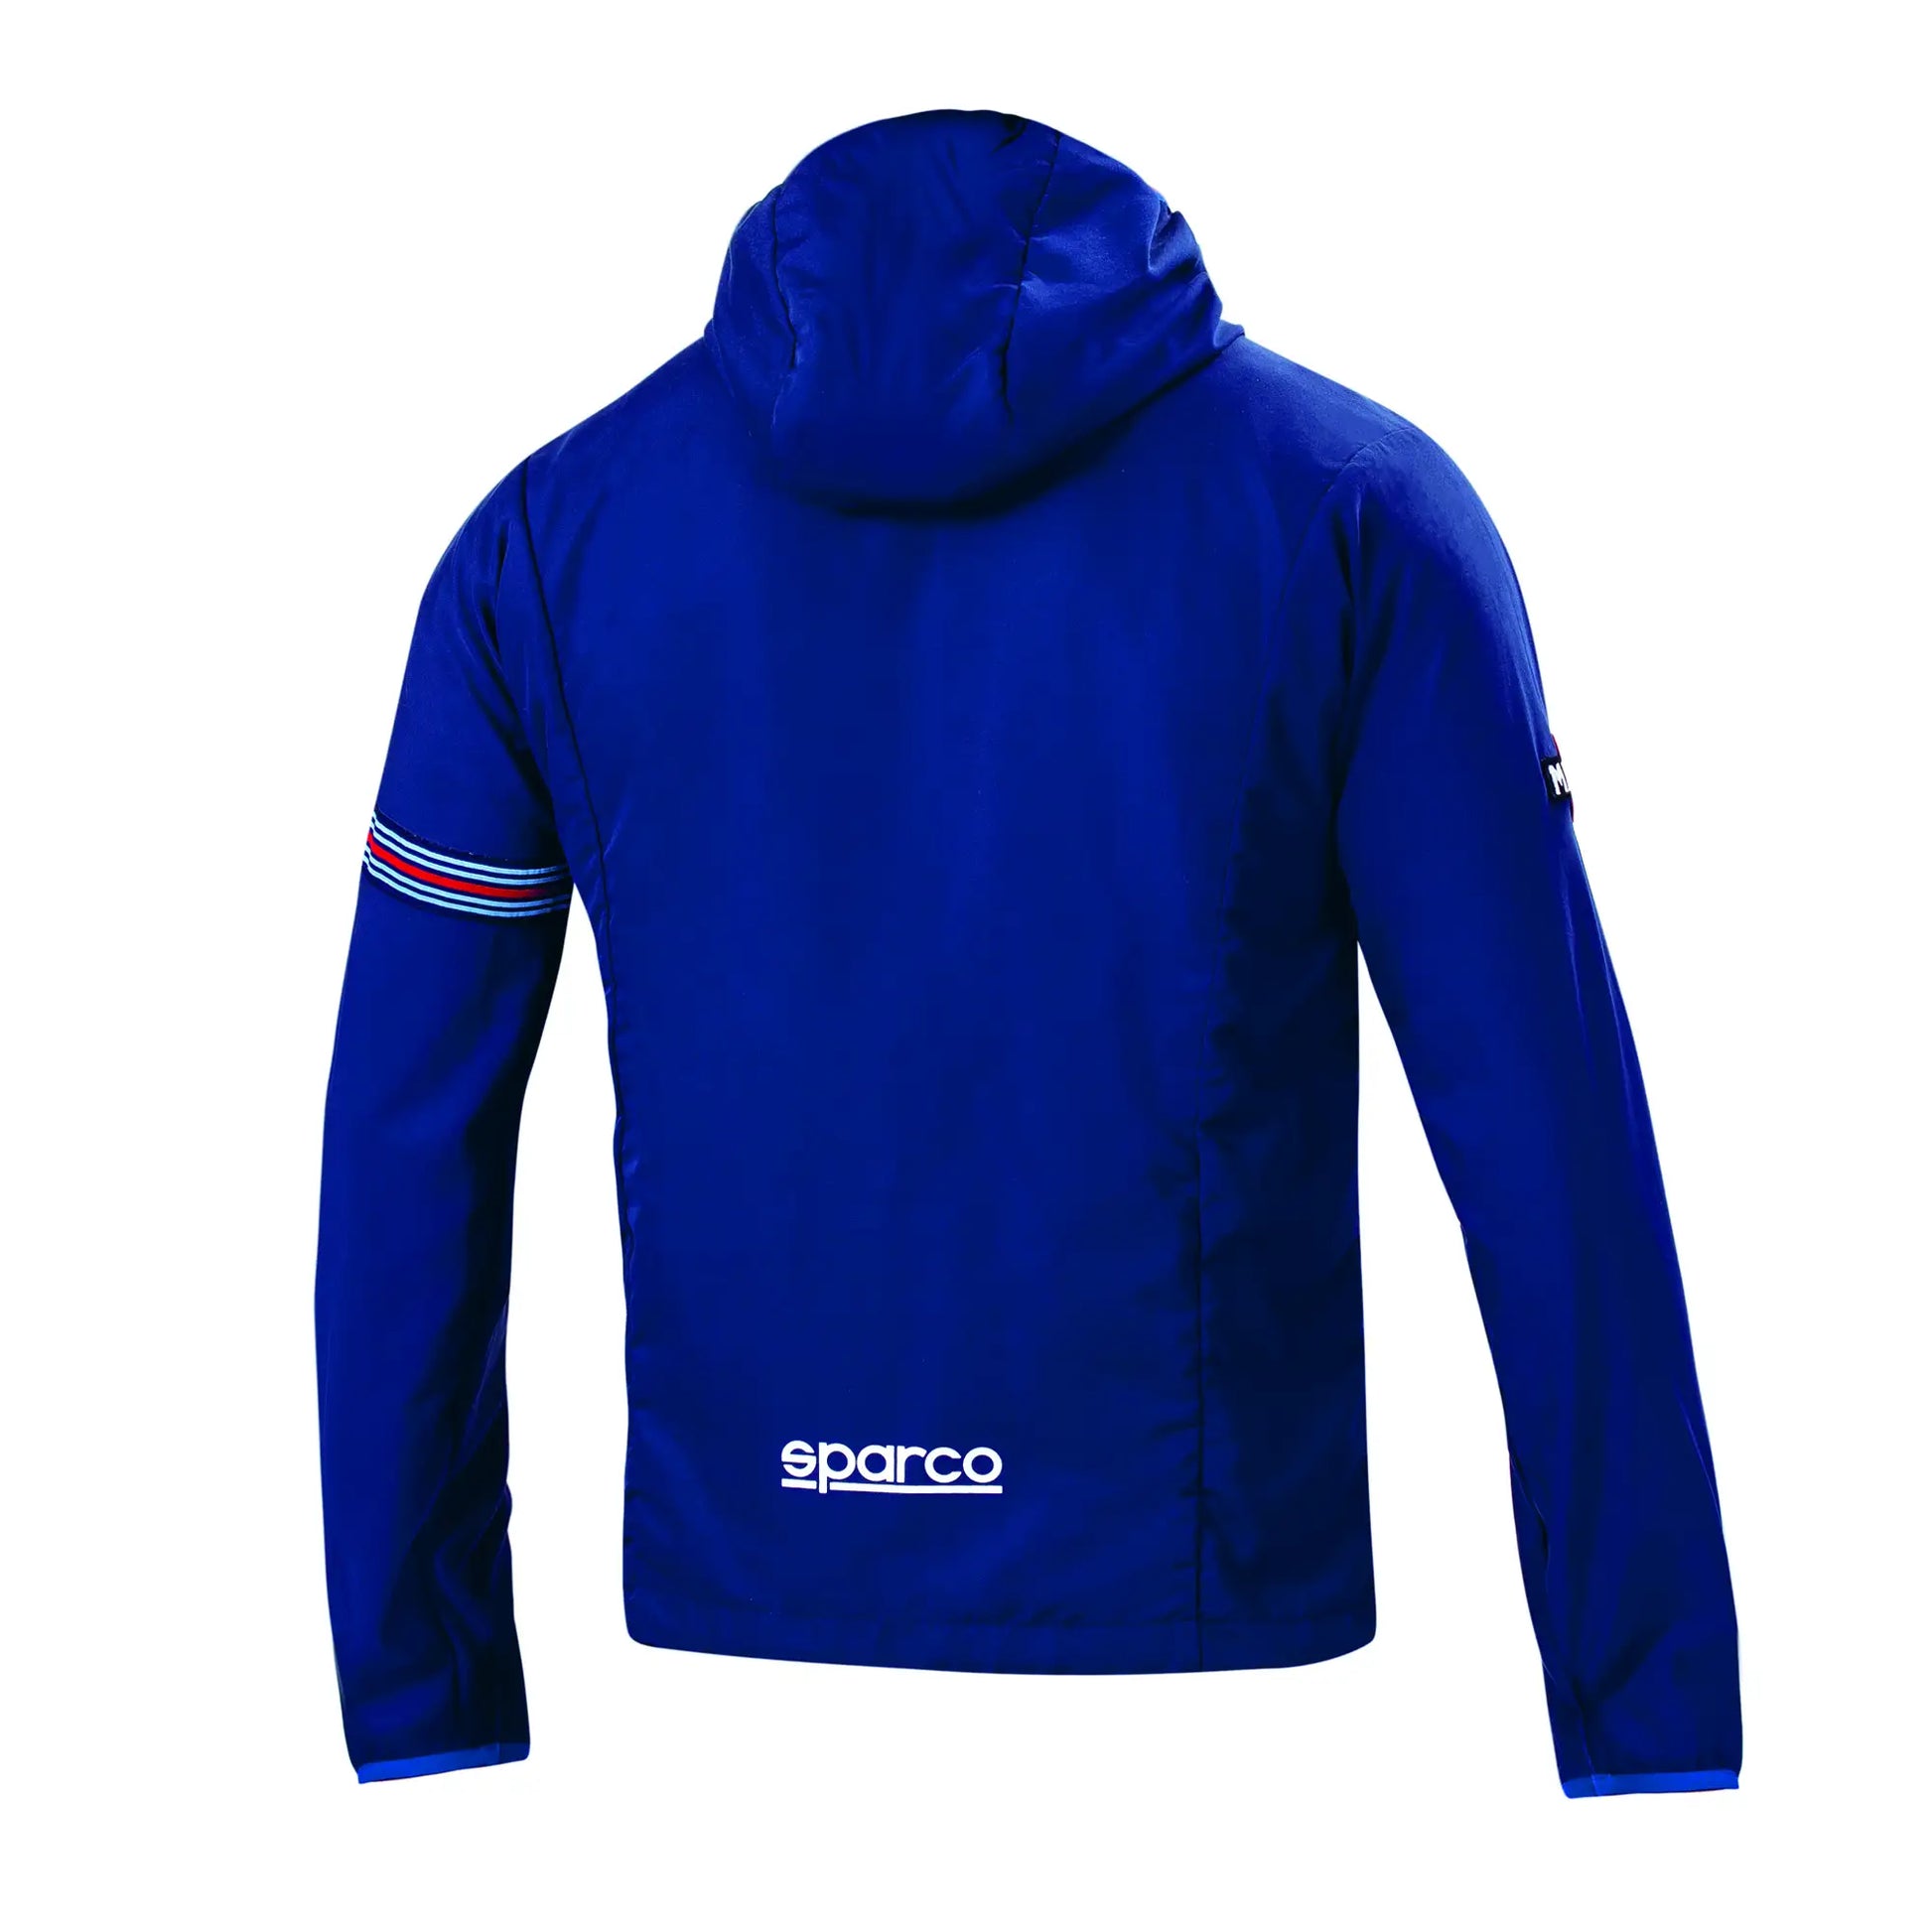 Wind Stopper Sparco martini racing